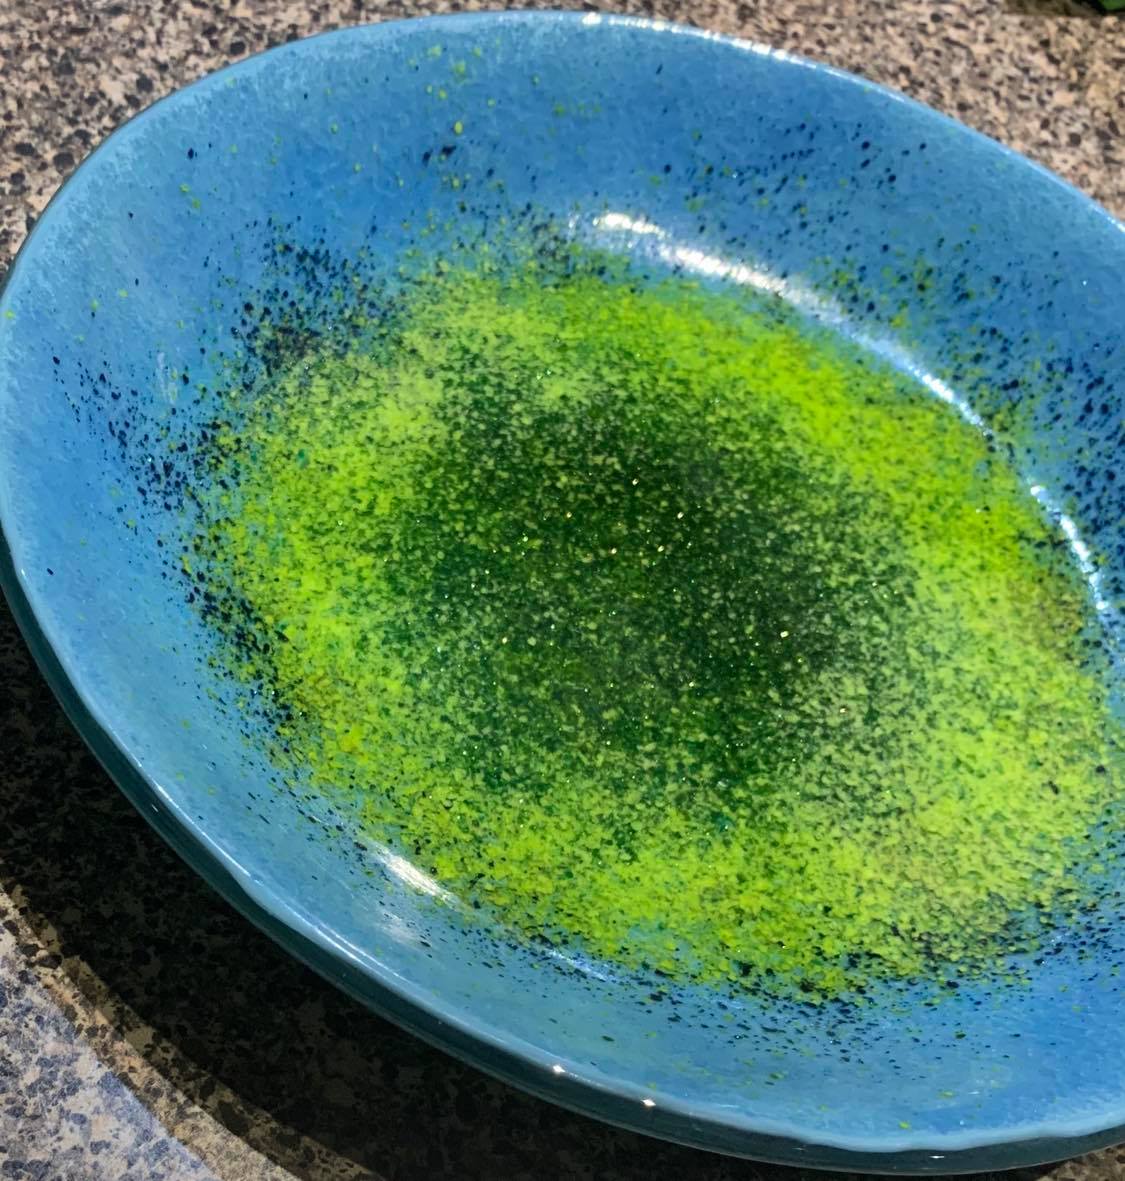 9" diameter shallow blue bowl with green shimmer in the center